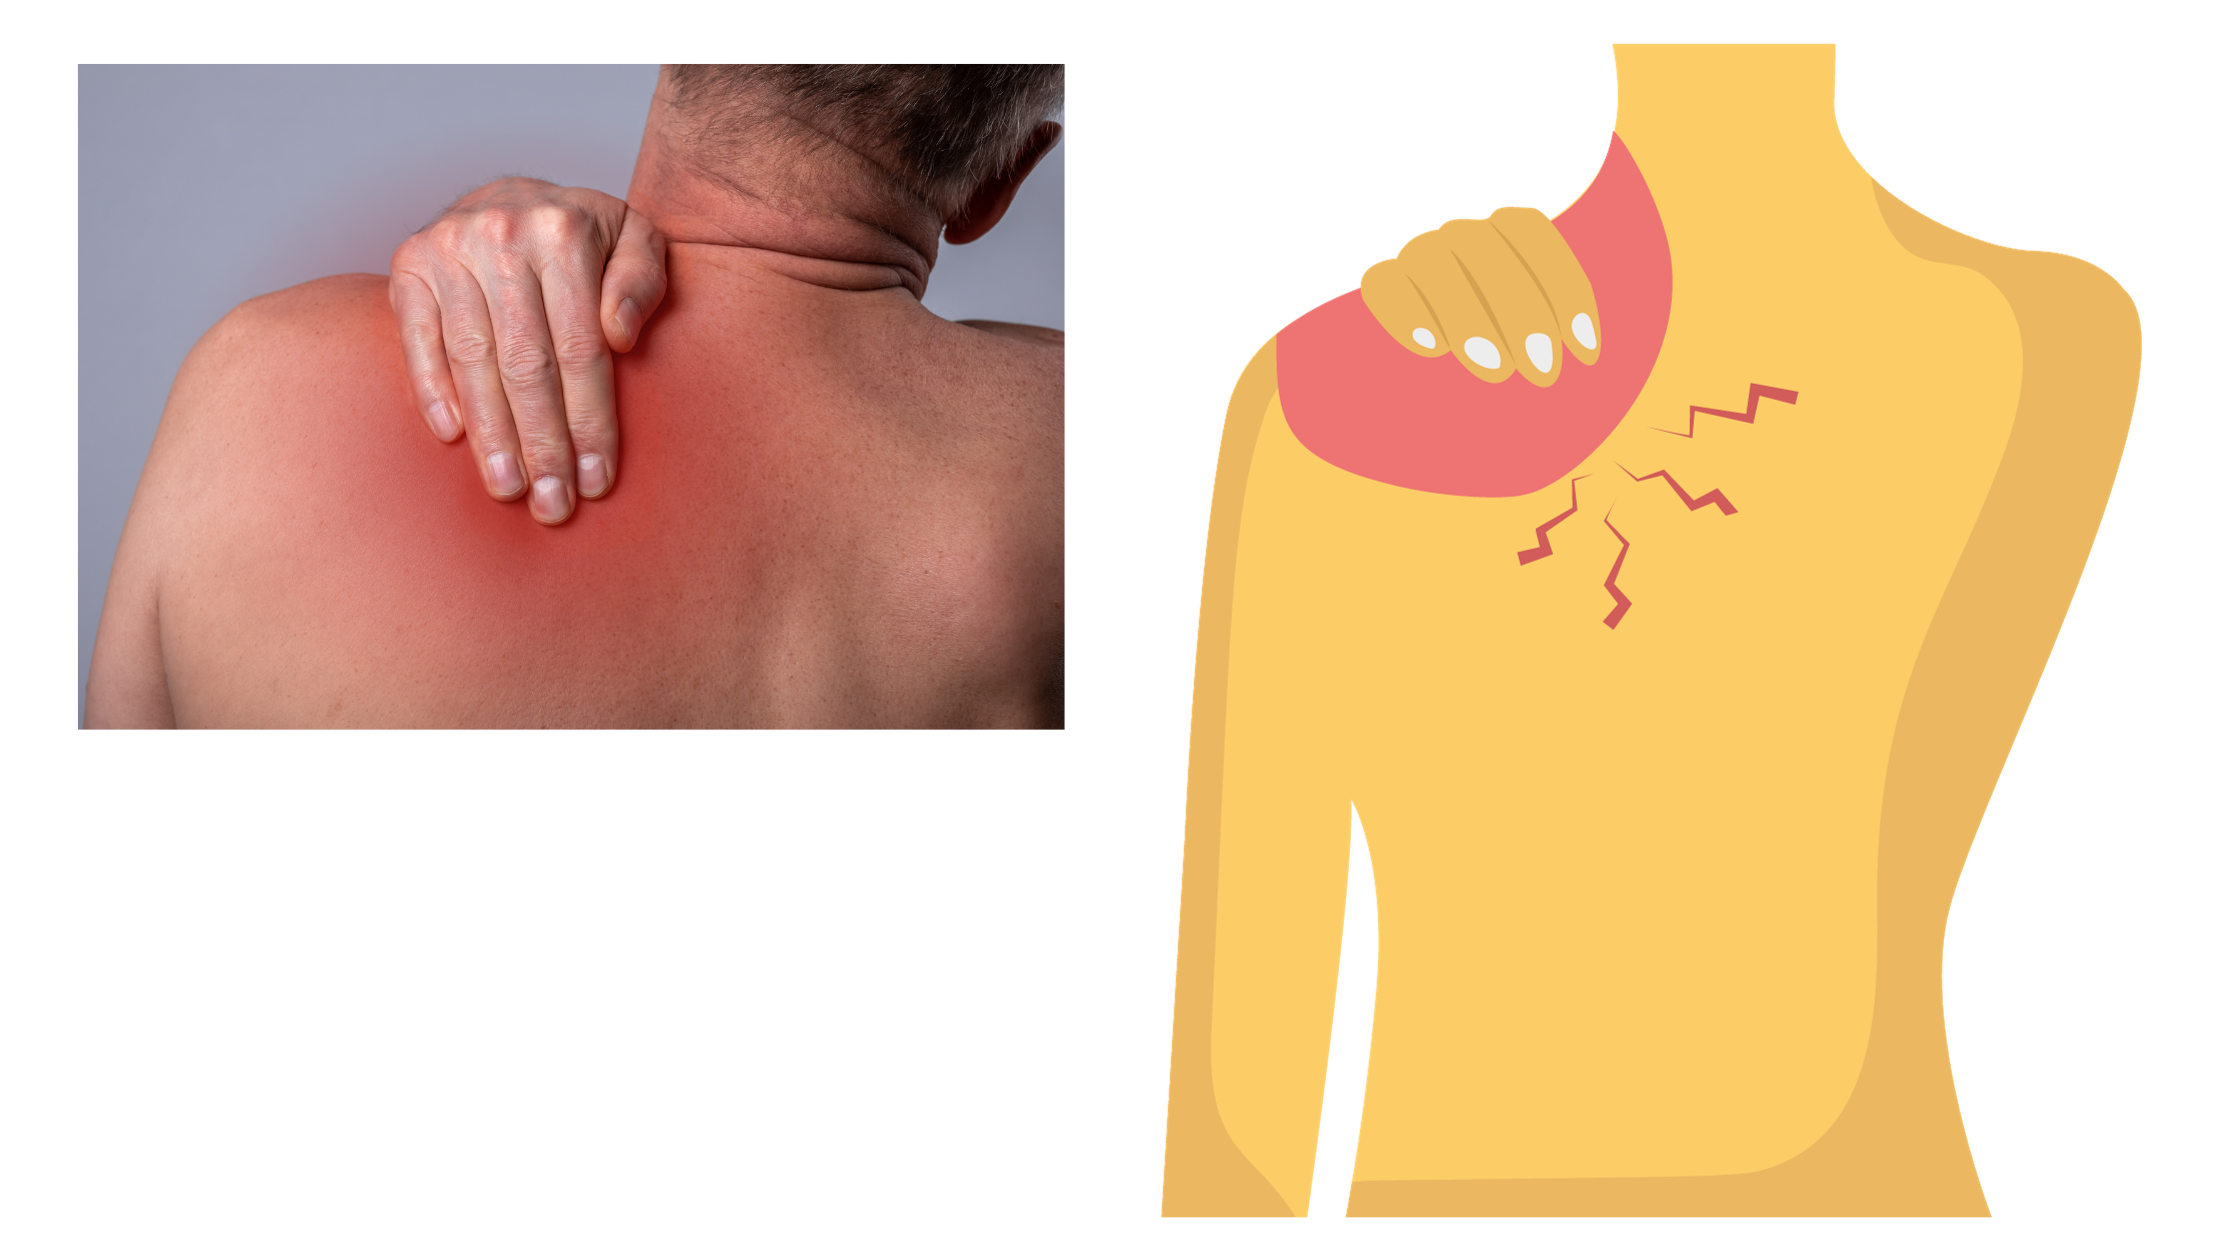 common attitude for those suffering from neck pain is to place a hand on the painful area